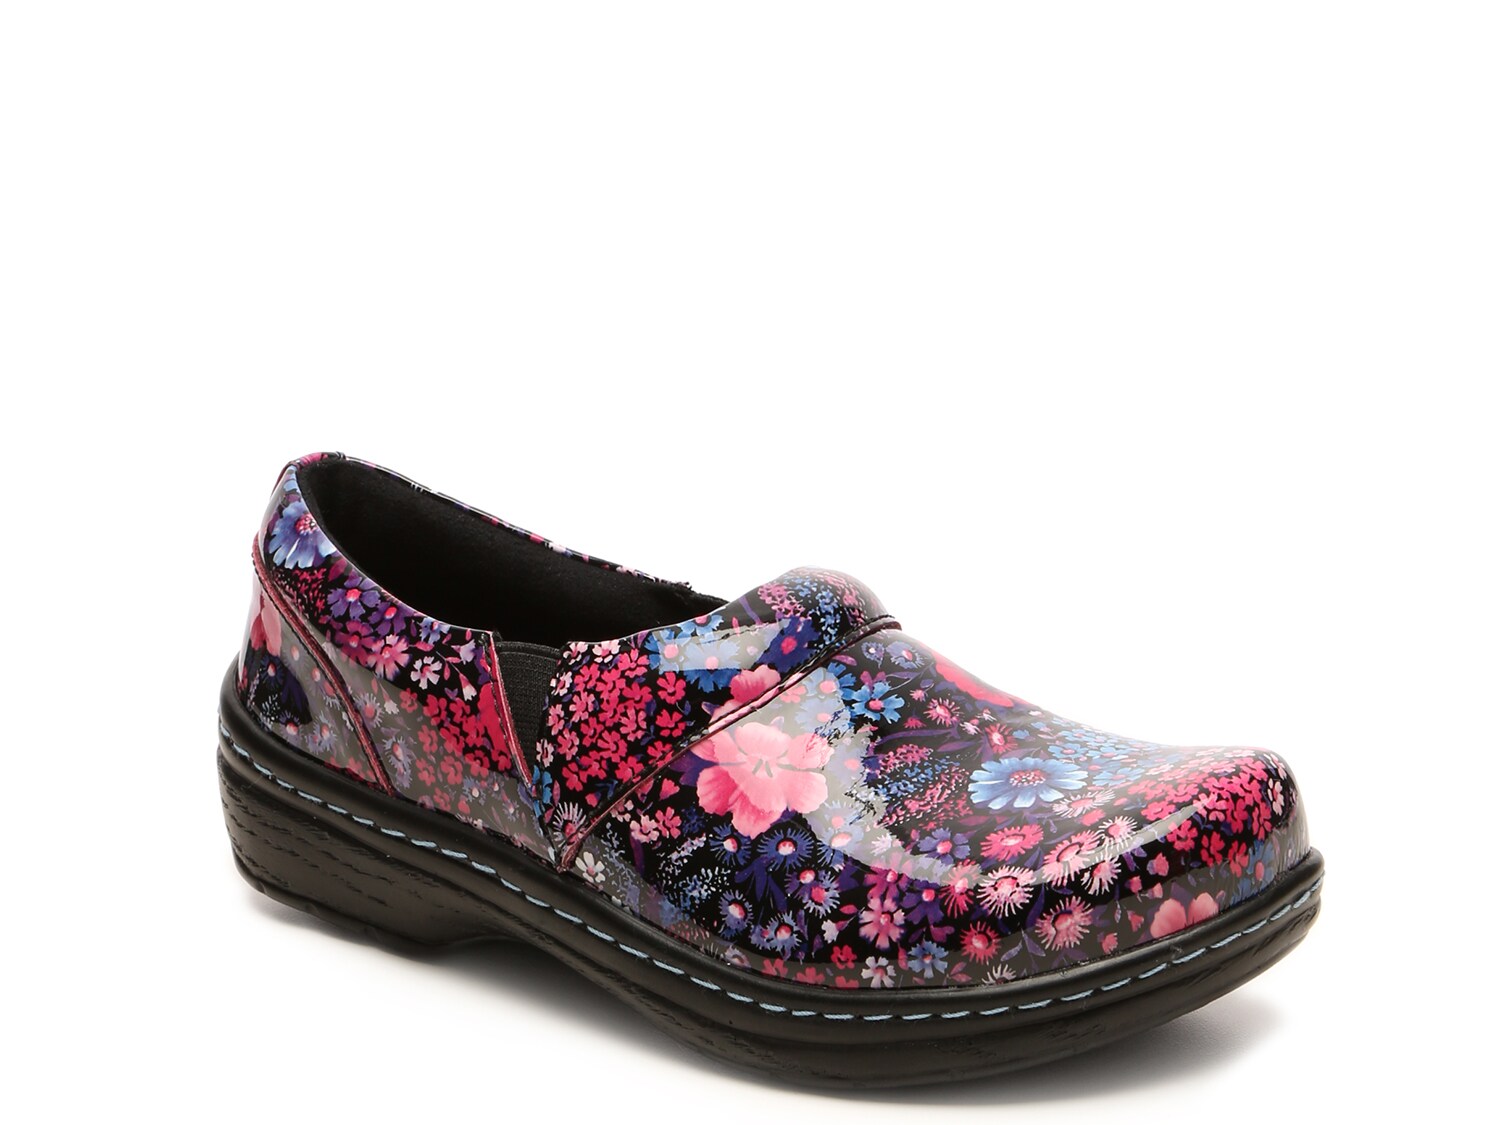 Klogs Mission Floral Work Clog - Free Shipping | DSW